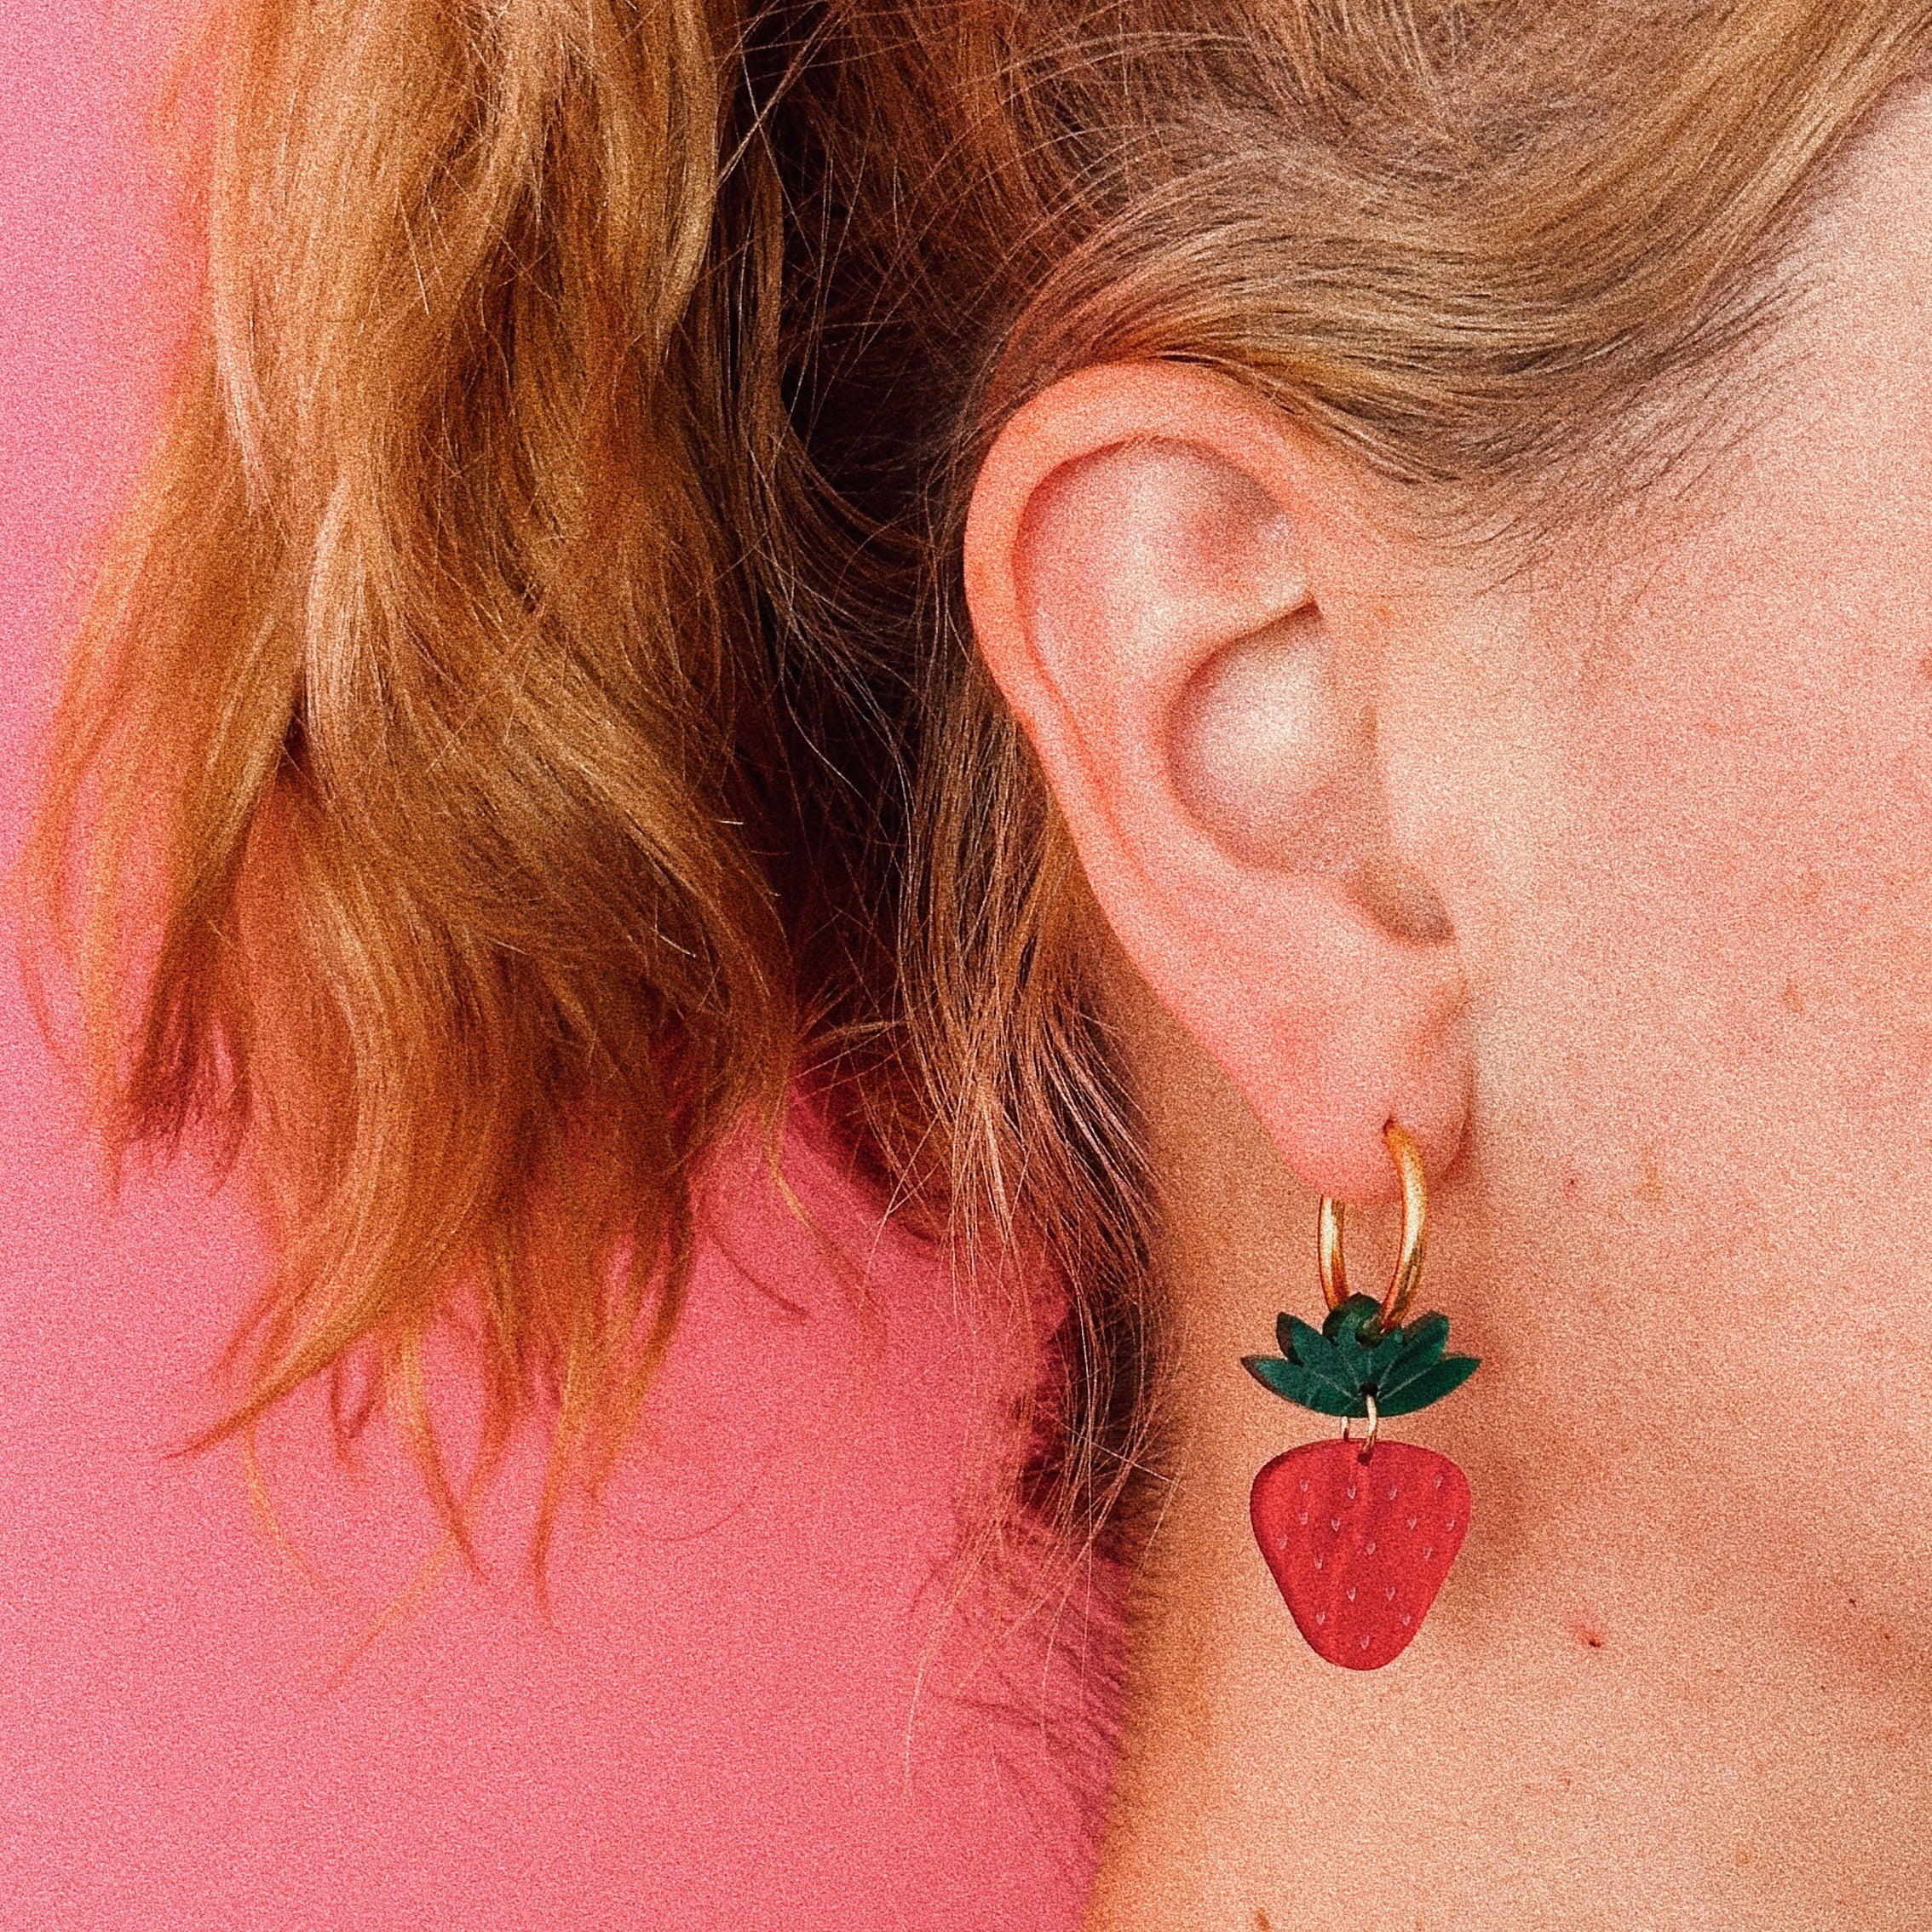 Strawberry earrings with stainless steel hoops